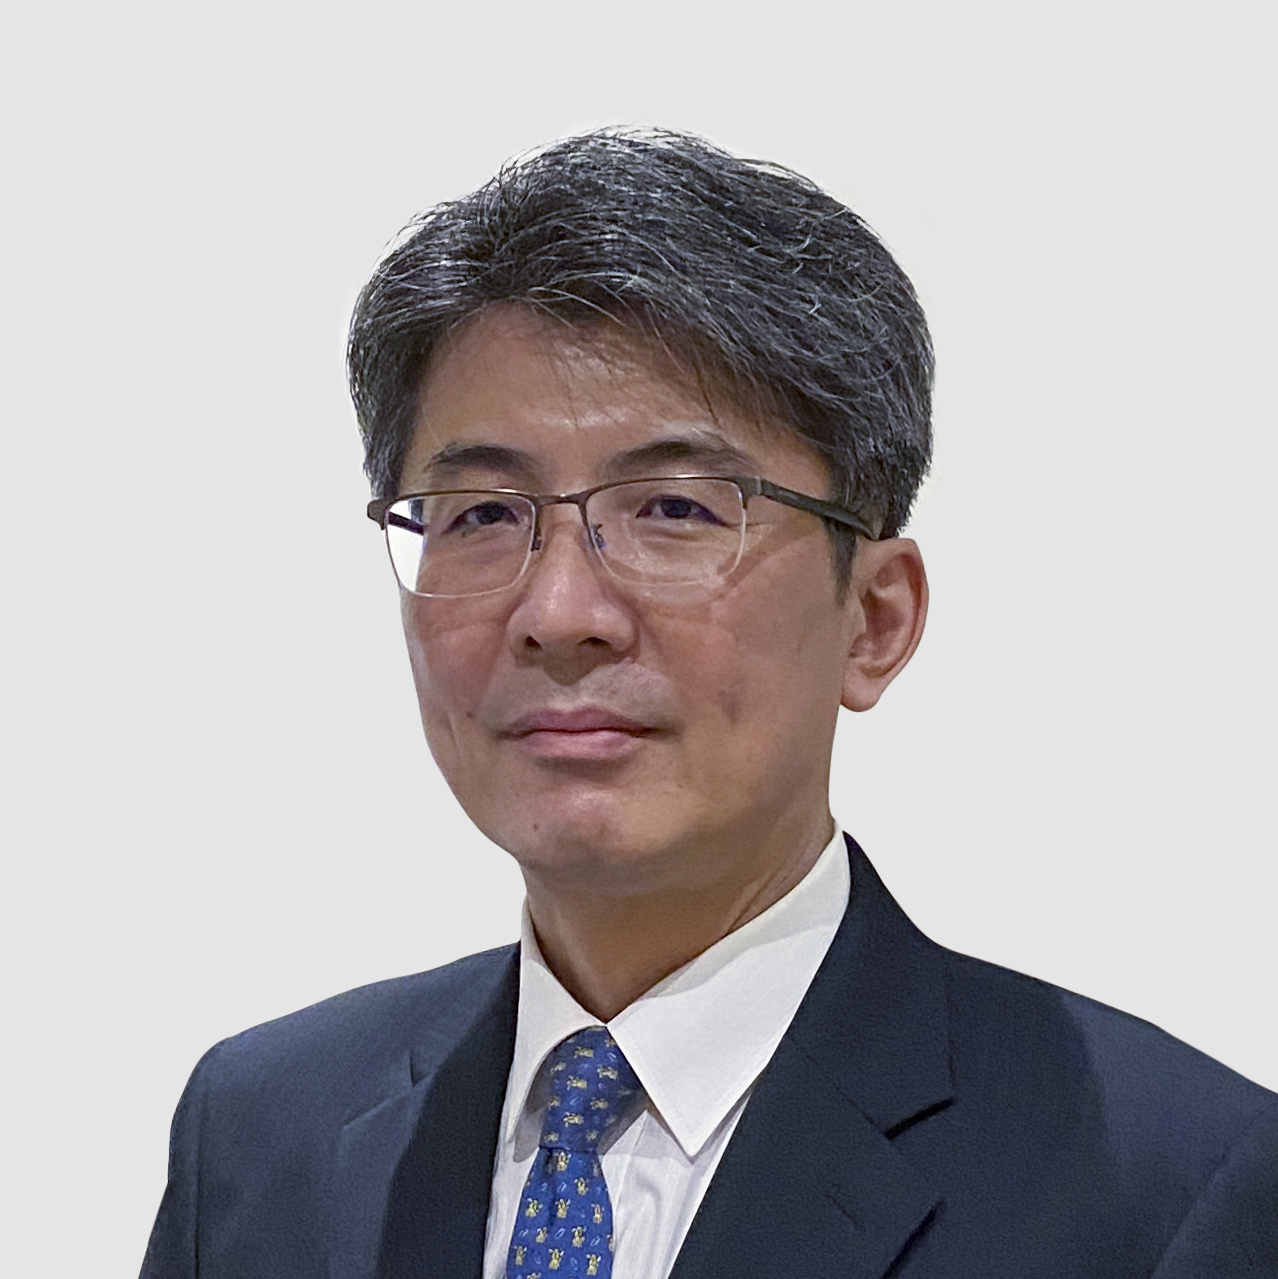 Satoru Ise is the Managing Director, Essex Furukawa Magnet Wire Malaysia, a role which he transitioned into after spending three years as Managing Director, Essex Furukawa Magnet Wire Europe GmbH for our initial 2017 joint venture and HVWW® development. Over the past 20 years, Ise has held positions of increasing responsibility in business development. Prior to his work with Essex Furukawa he was a Director, Business planning and development, OFS Fitel LLC. as well as Manager, Overseas Business Development Team, Planning and Administration department, Telecommunications Company. Ise obtained his degree from Kansai University, Faculty of Engineering, in Osaka, Japan. 